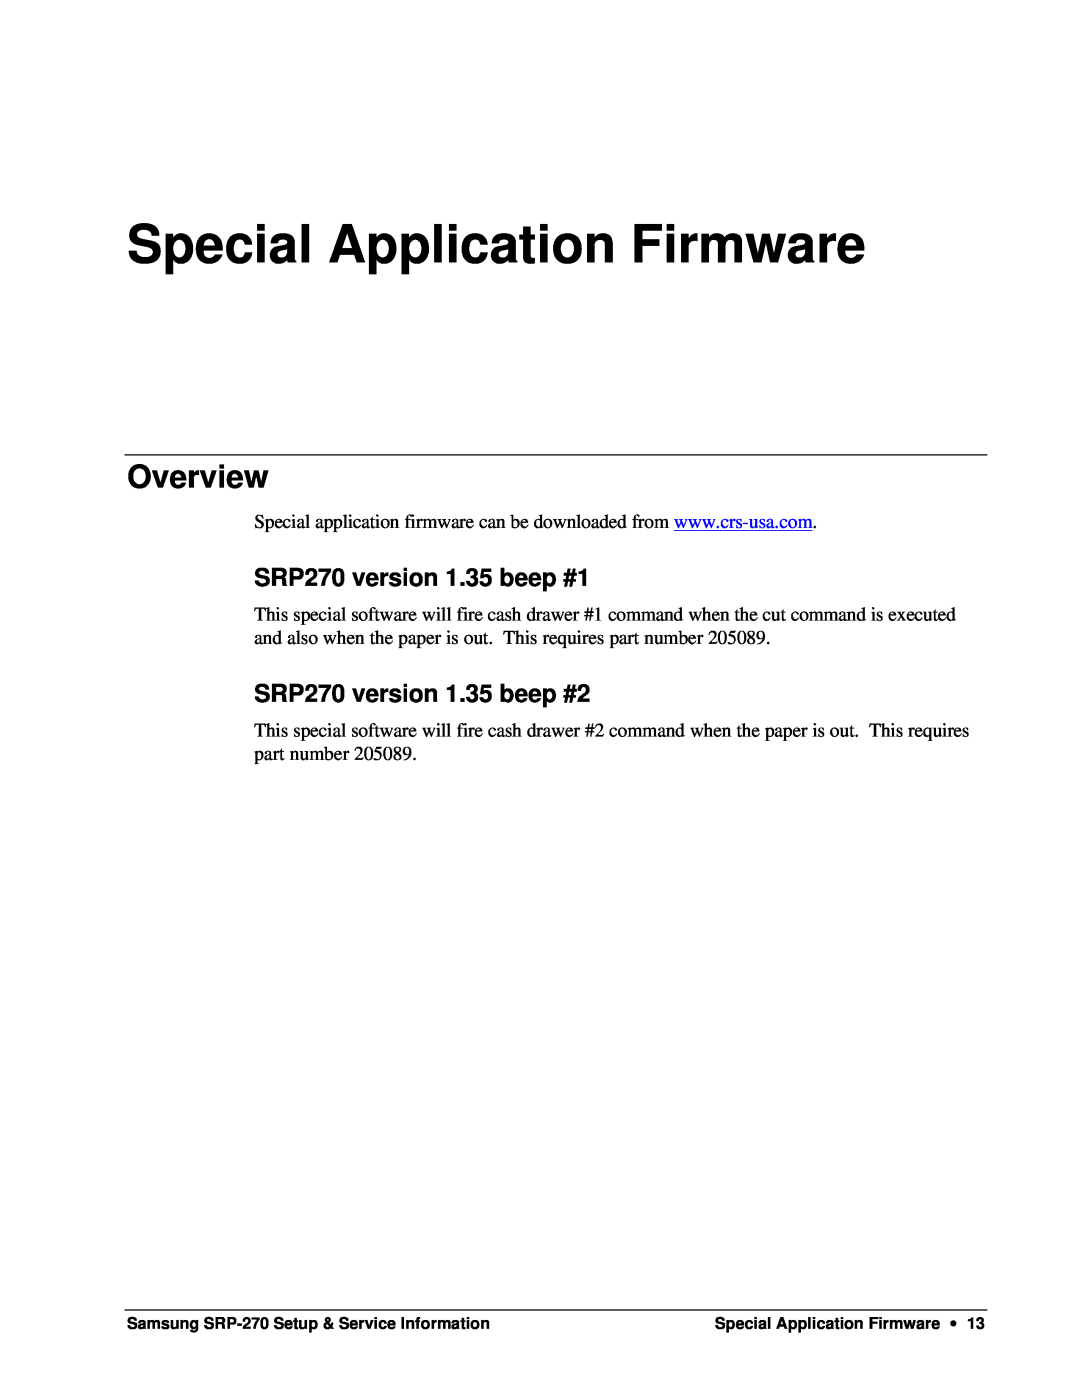 Samsung SRP-270 Special Application Firmware, SRP270 version 1.35 beep #1, SRP270 version 1.35 beep #2, Overview 